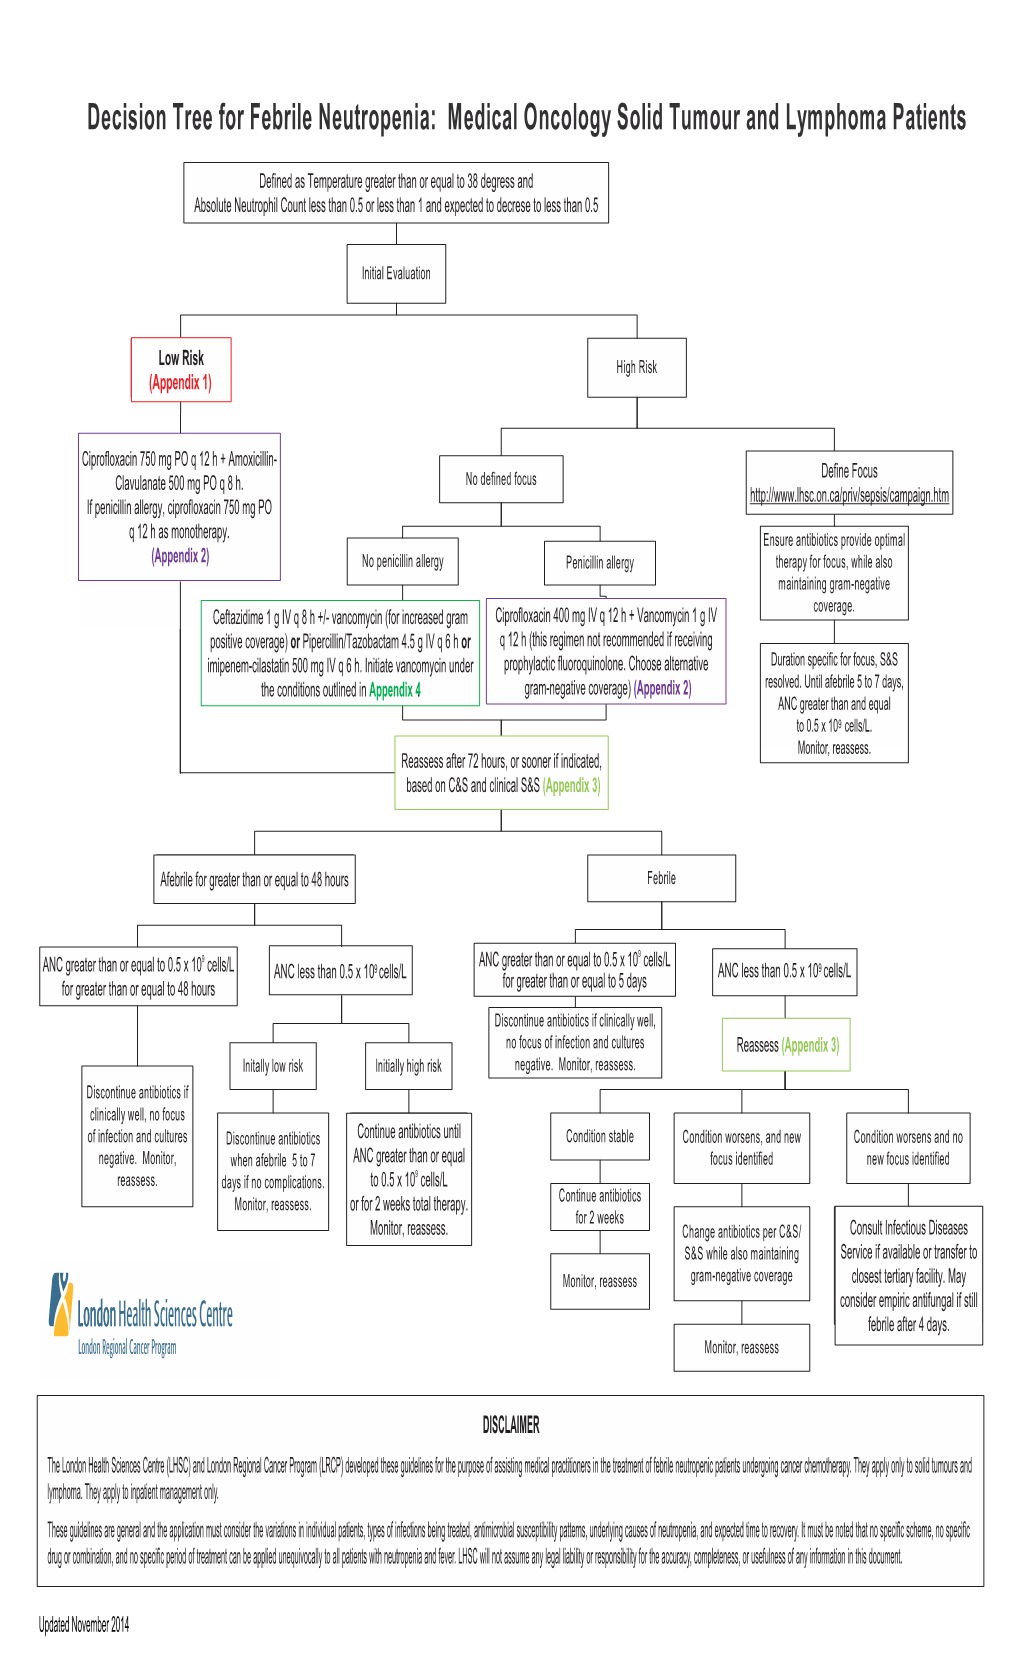 Decision Tree for Febrile Neutropenia: Medical Oncology